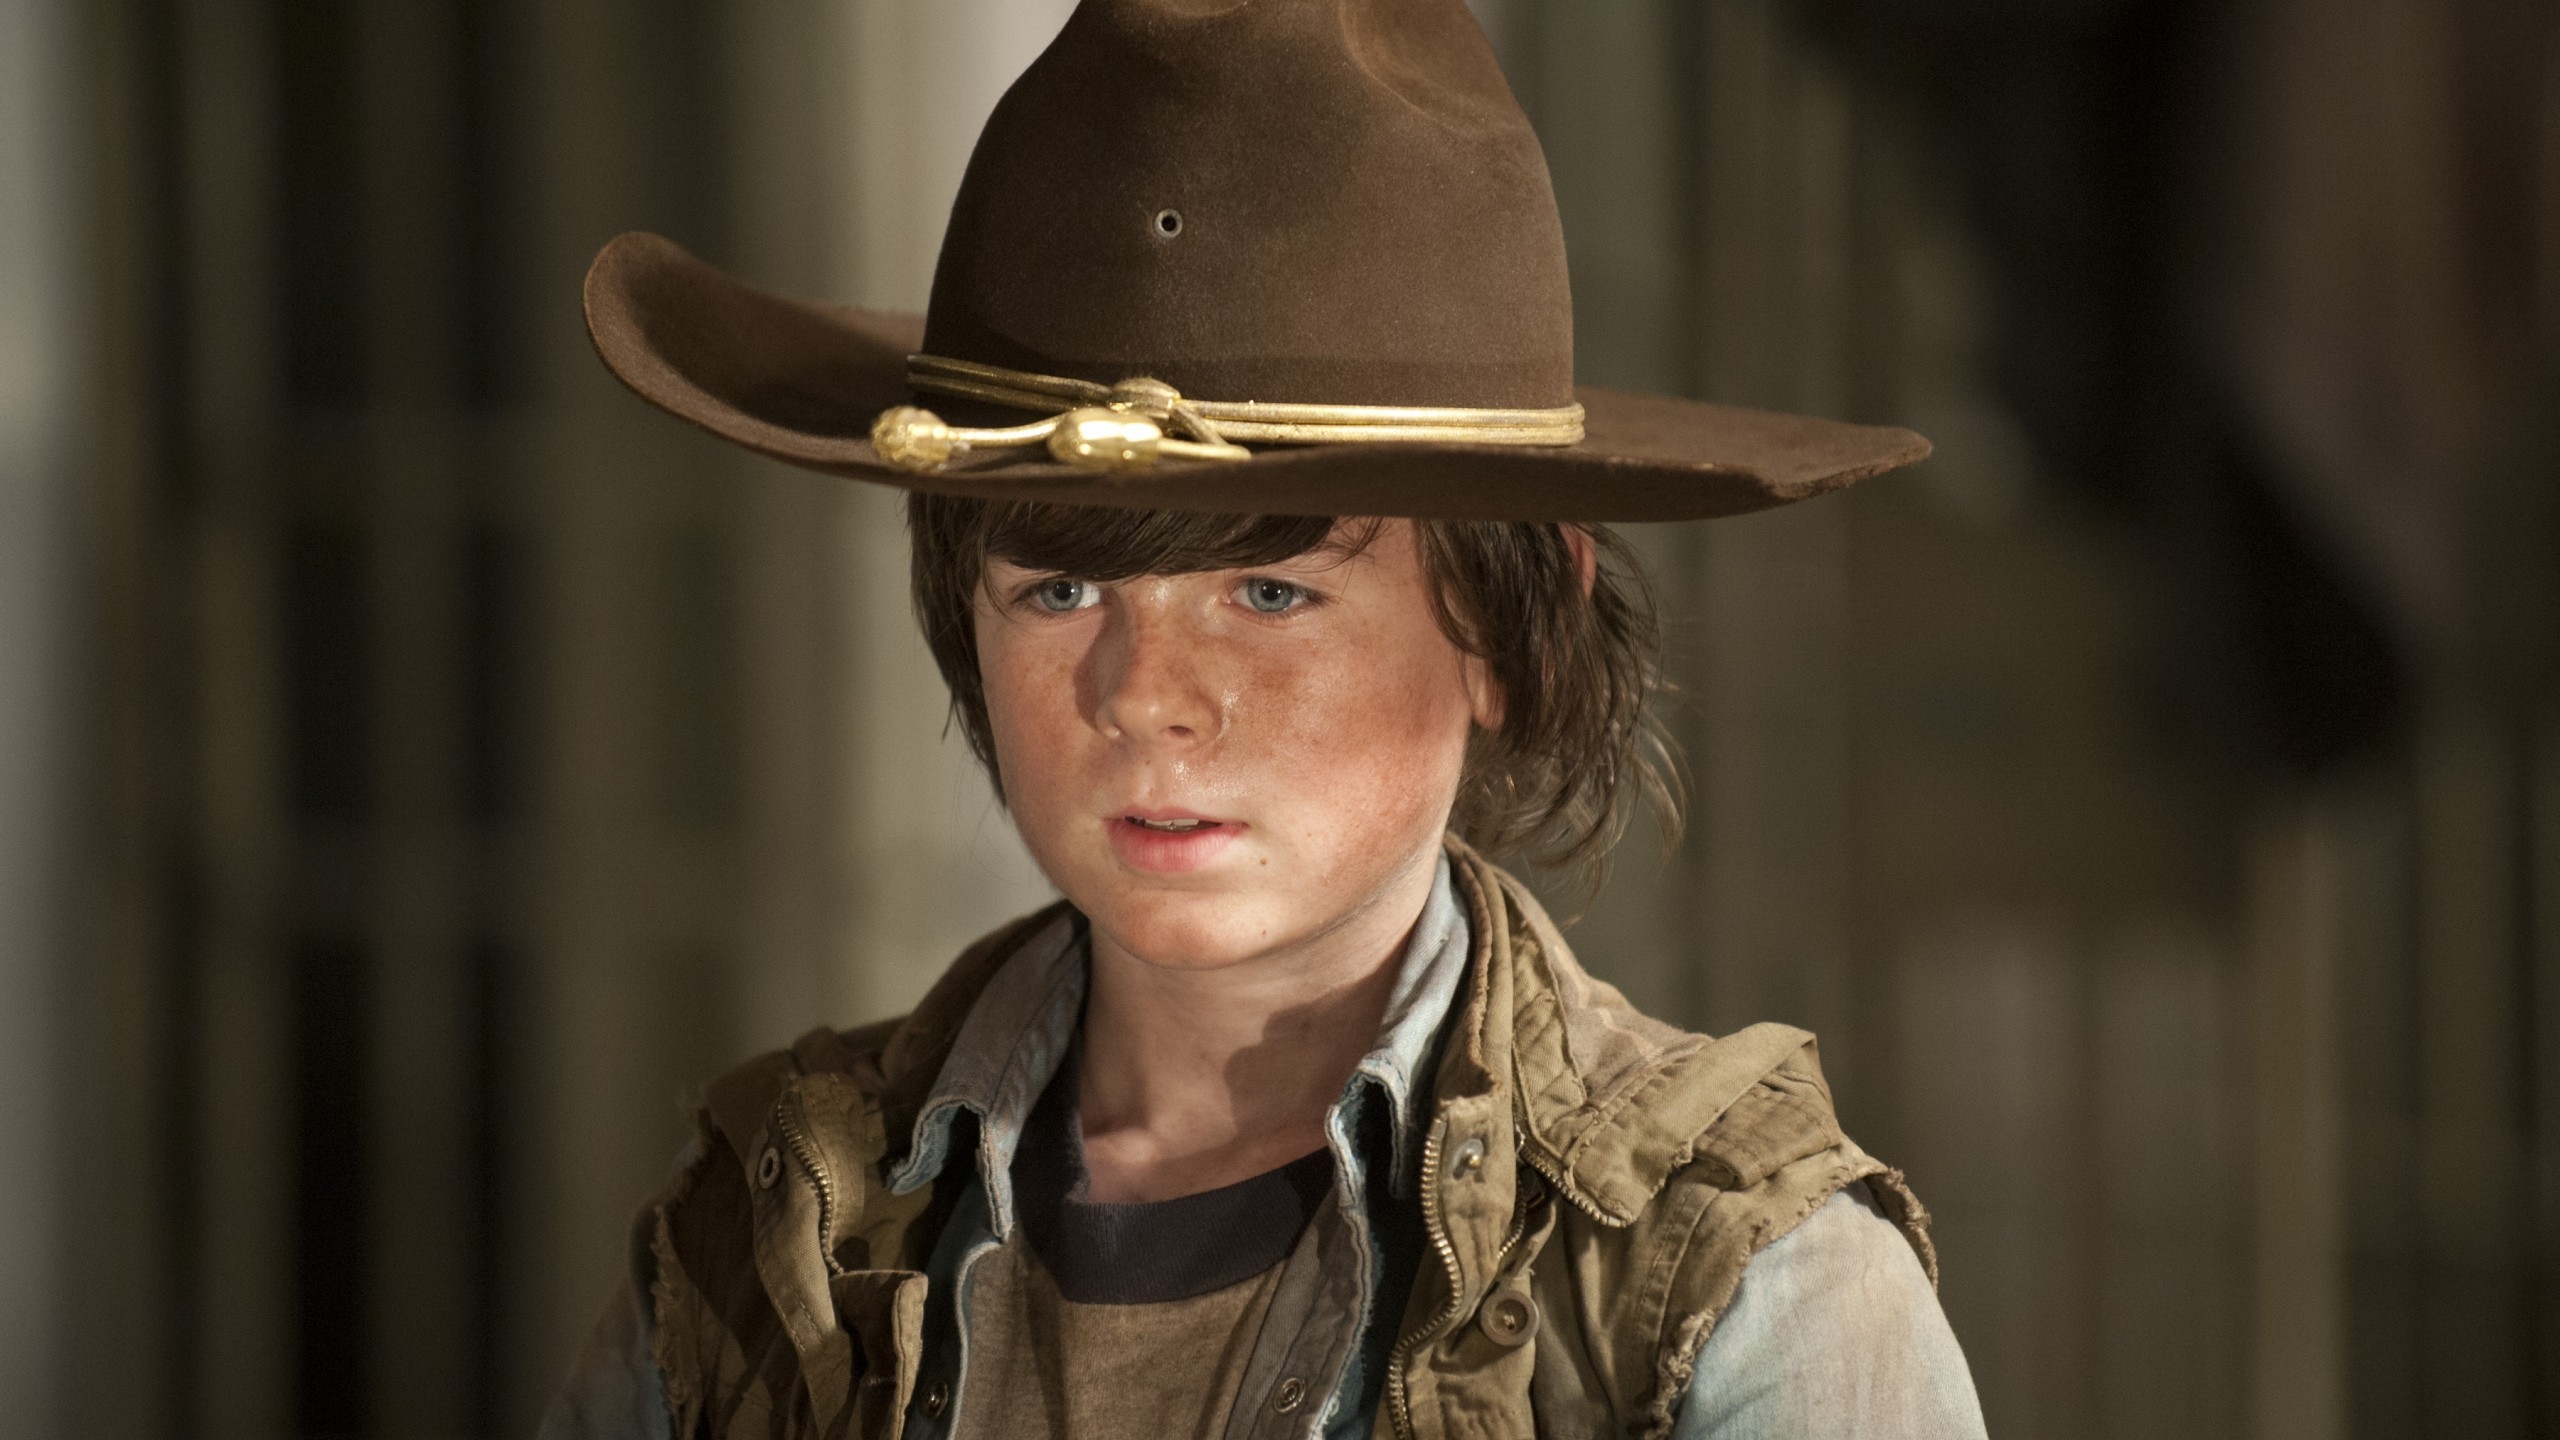 Carl Grimes The Walking Dead for 2560x1440 HDTV resolution